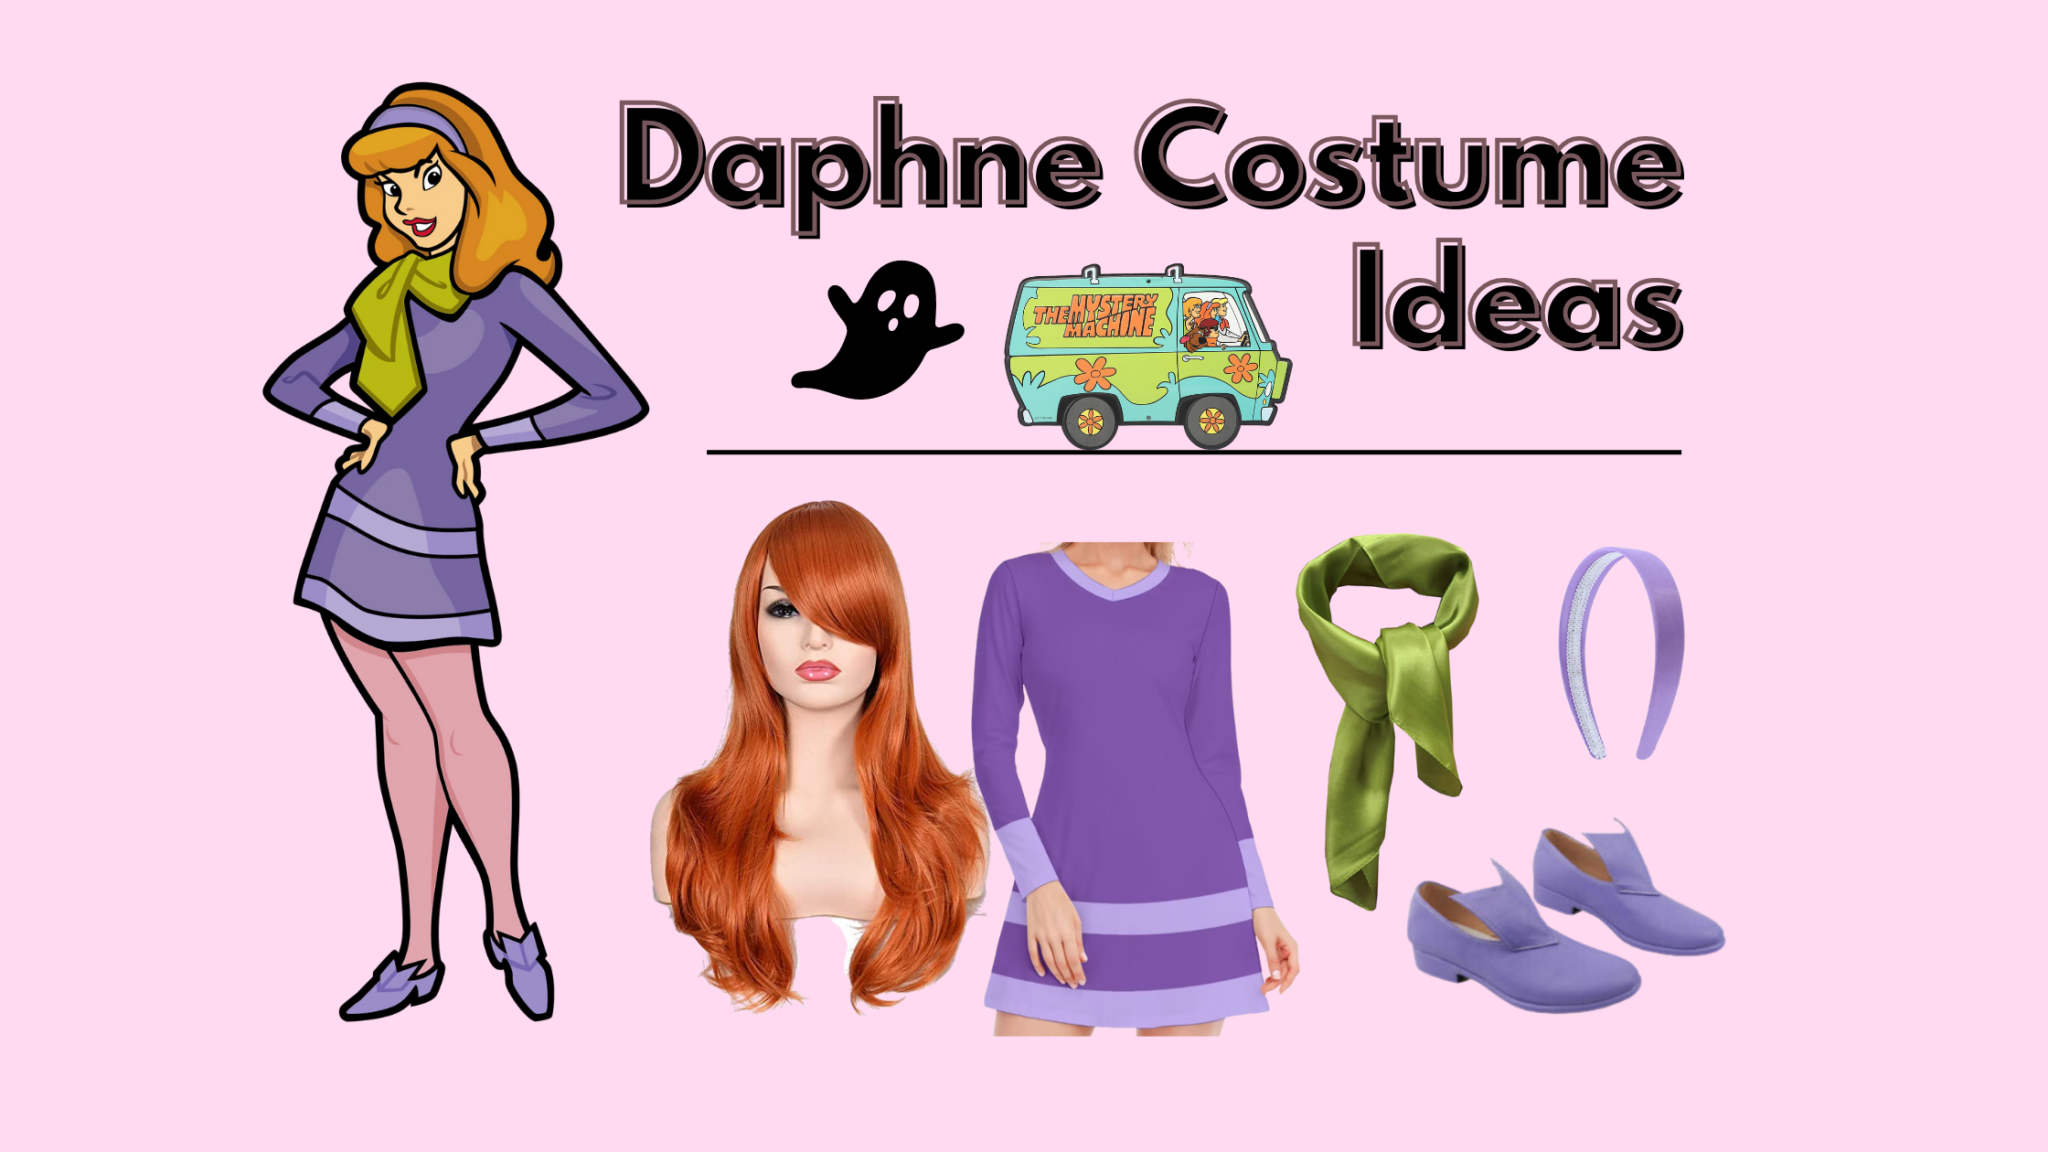 Daphne Costume Inspiration for Halloween and Cosplay